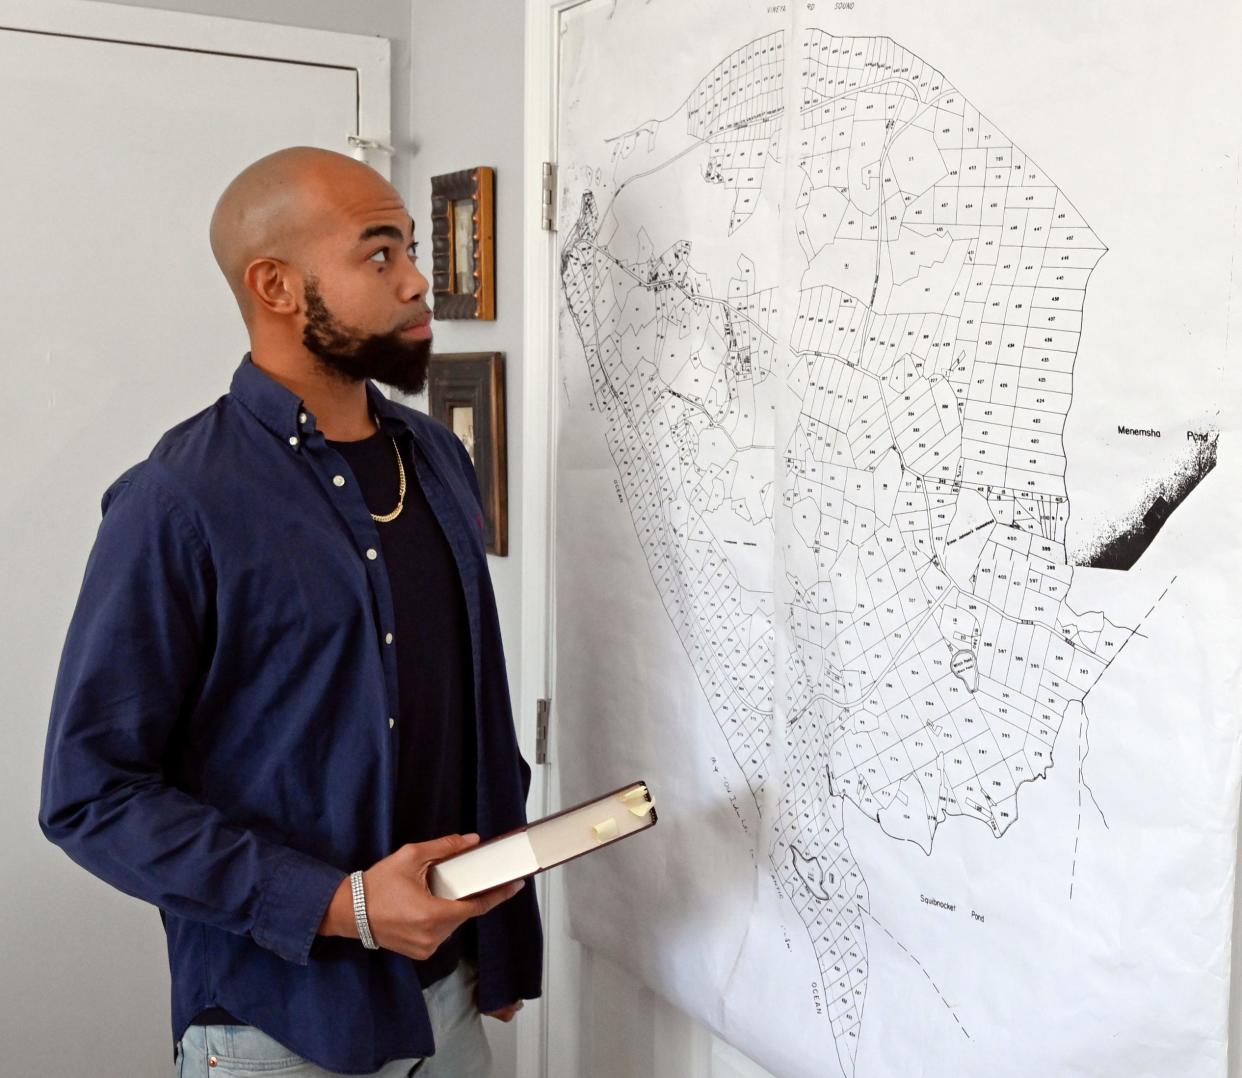 Troy Small, one of the defendants in the lawsuit brought by Vineyard Conservation Society, questioned the validity of the 1945 deed. He was photographed in October 2022 with a map of Aquinnah land parcels.